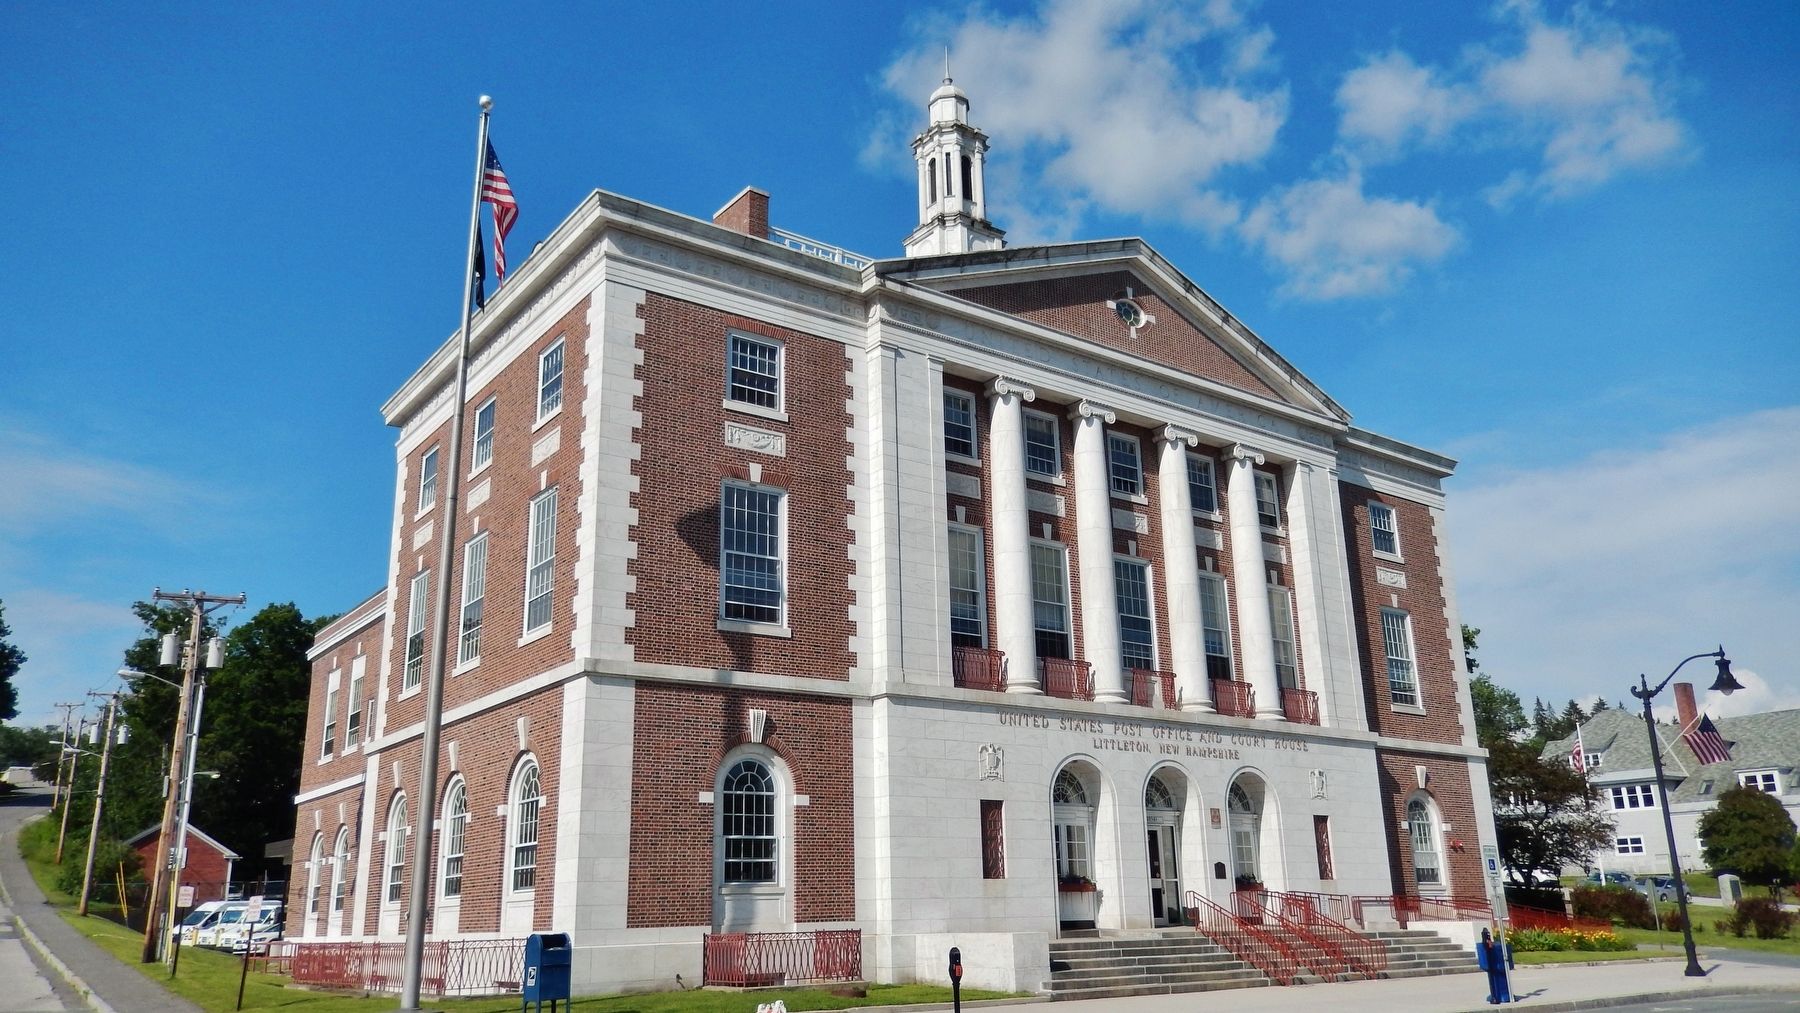 U.S. Post Office and Courthouse, Littleton, New Hampshire image. Click for full size.